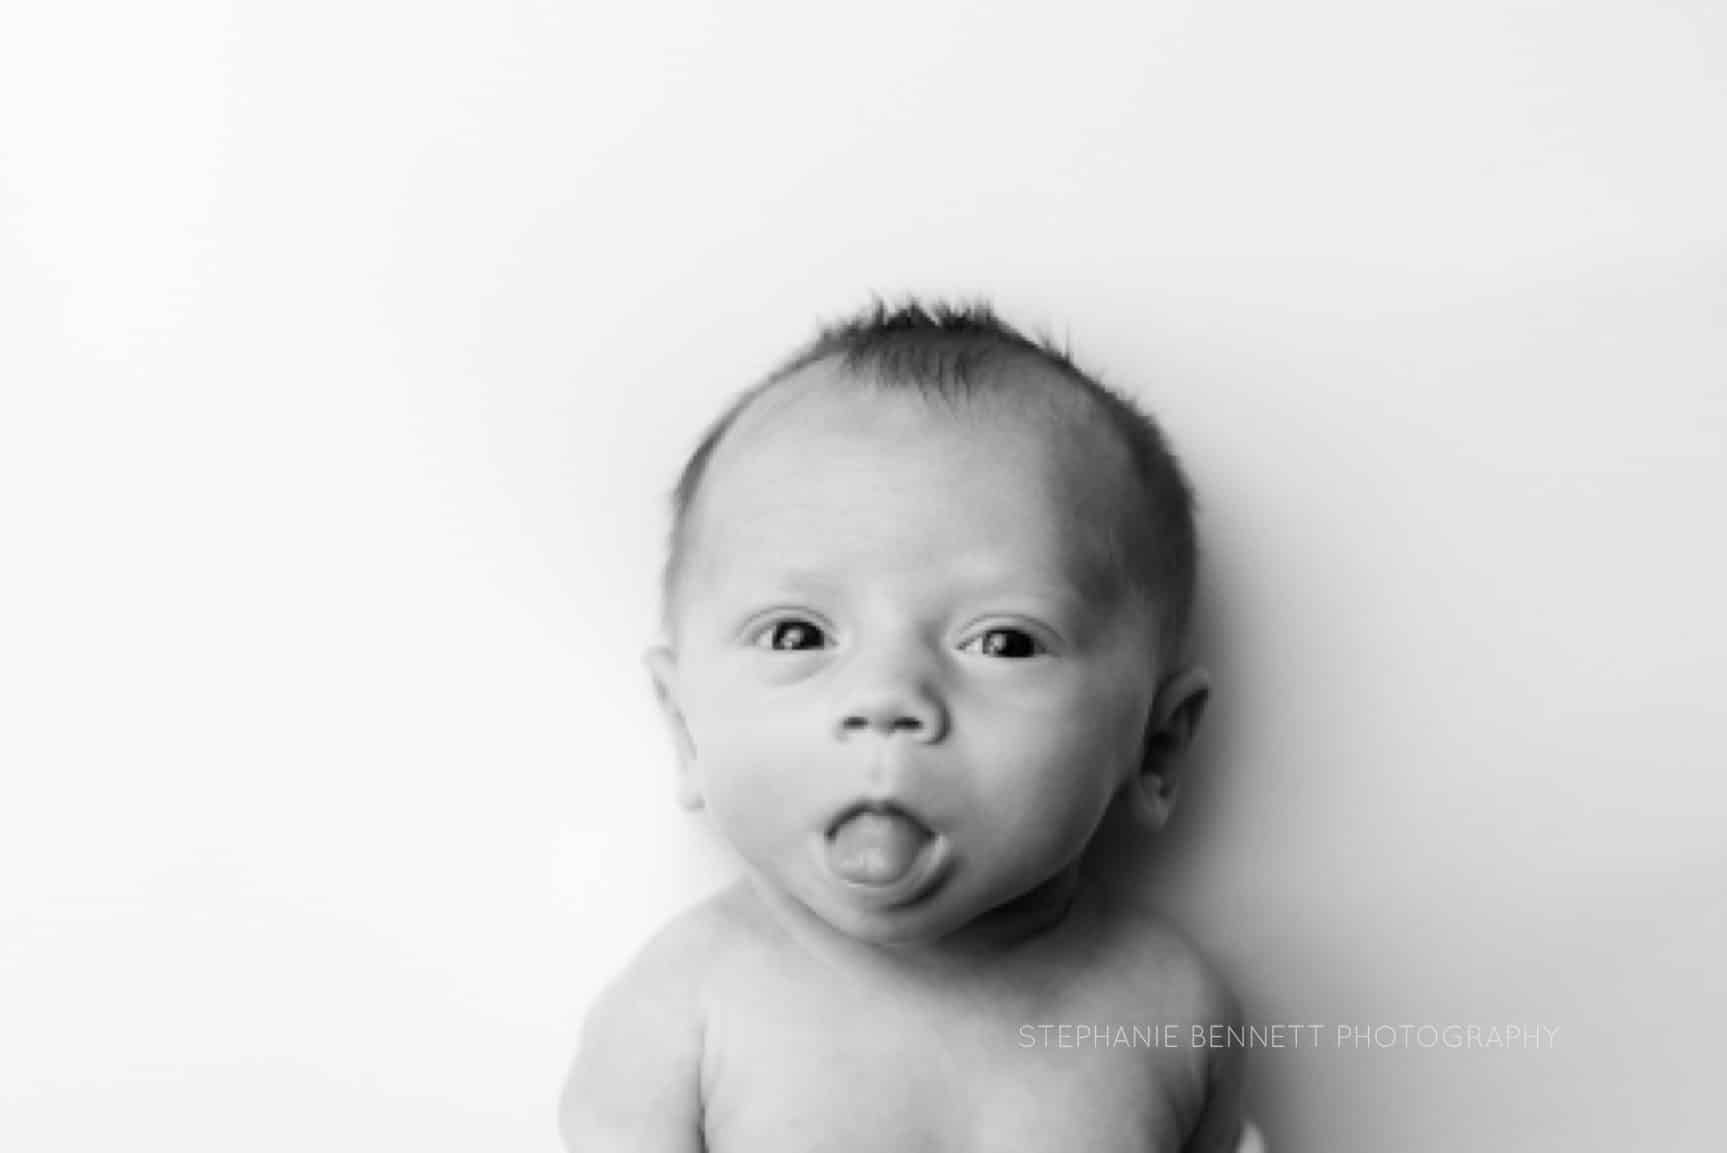 Newborn Photography Session with a Minneapolis Baby